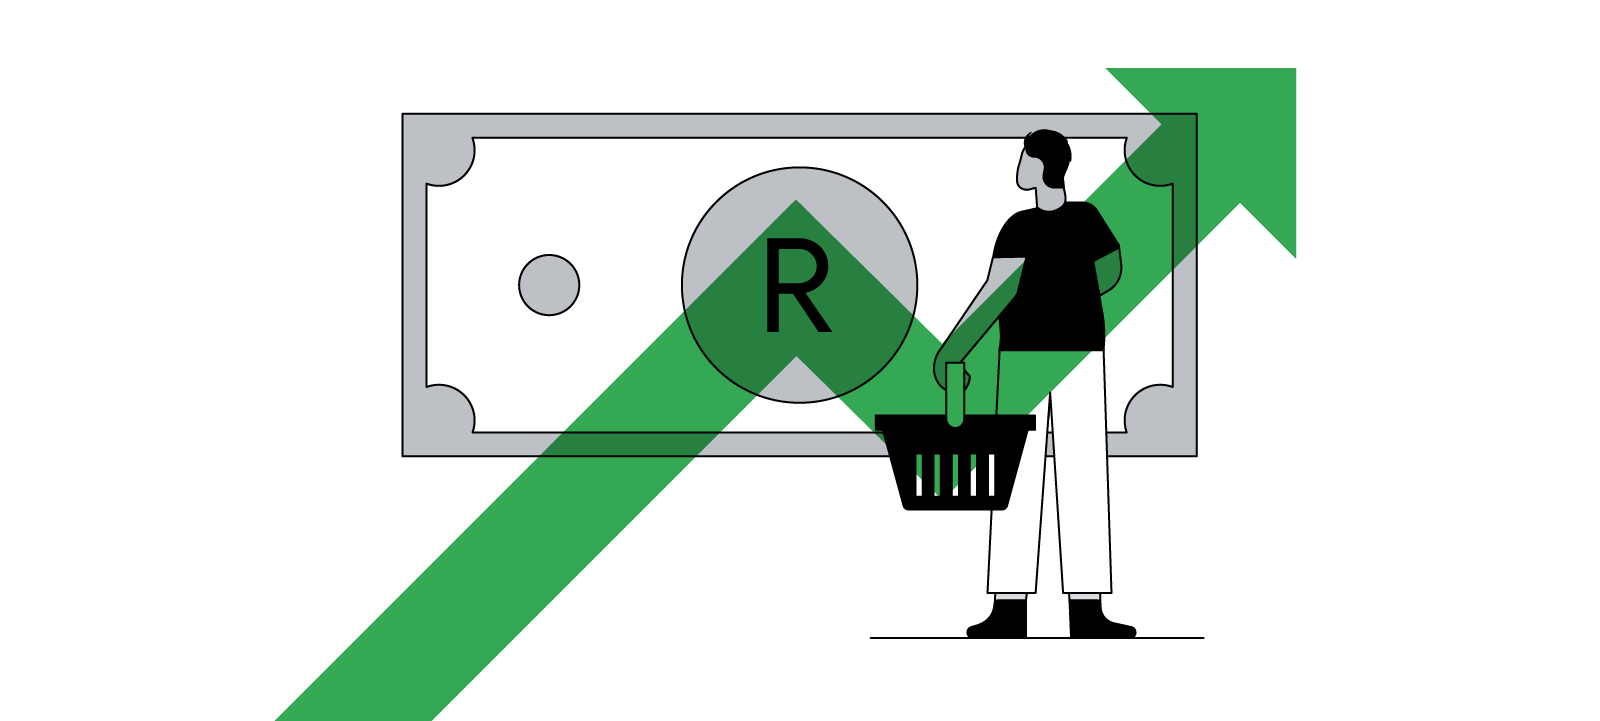 An illustration showing an individual holding a shopping basket and looking at a large banknote. A green arrow is superimposed over the illustration, indicating the person is thinking about rising prices